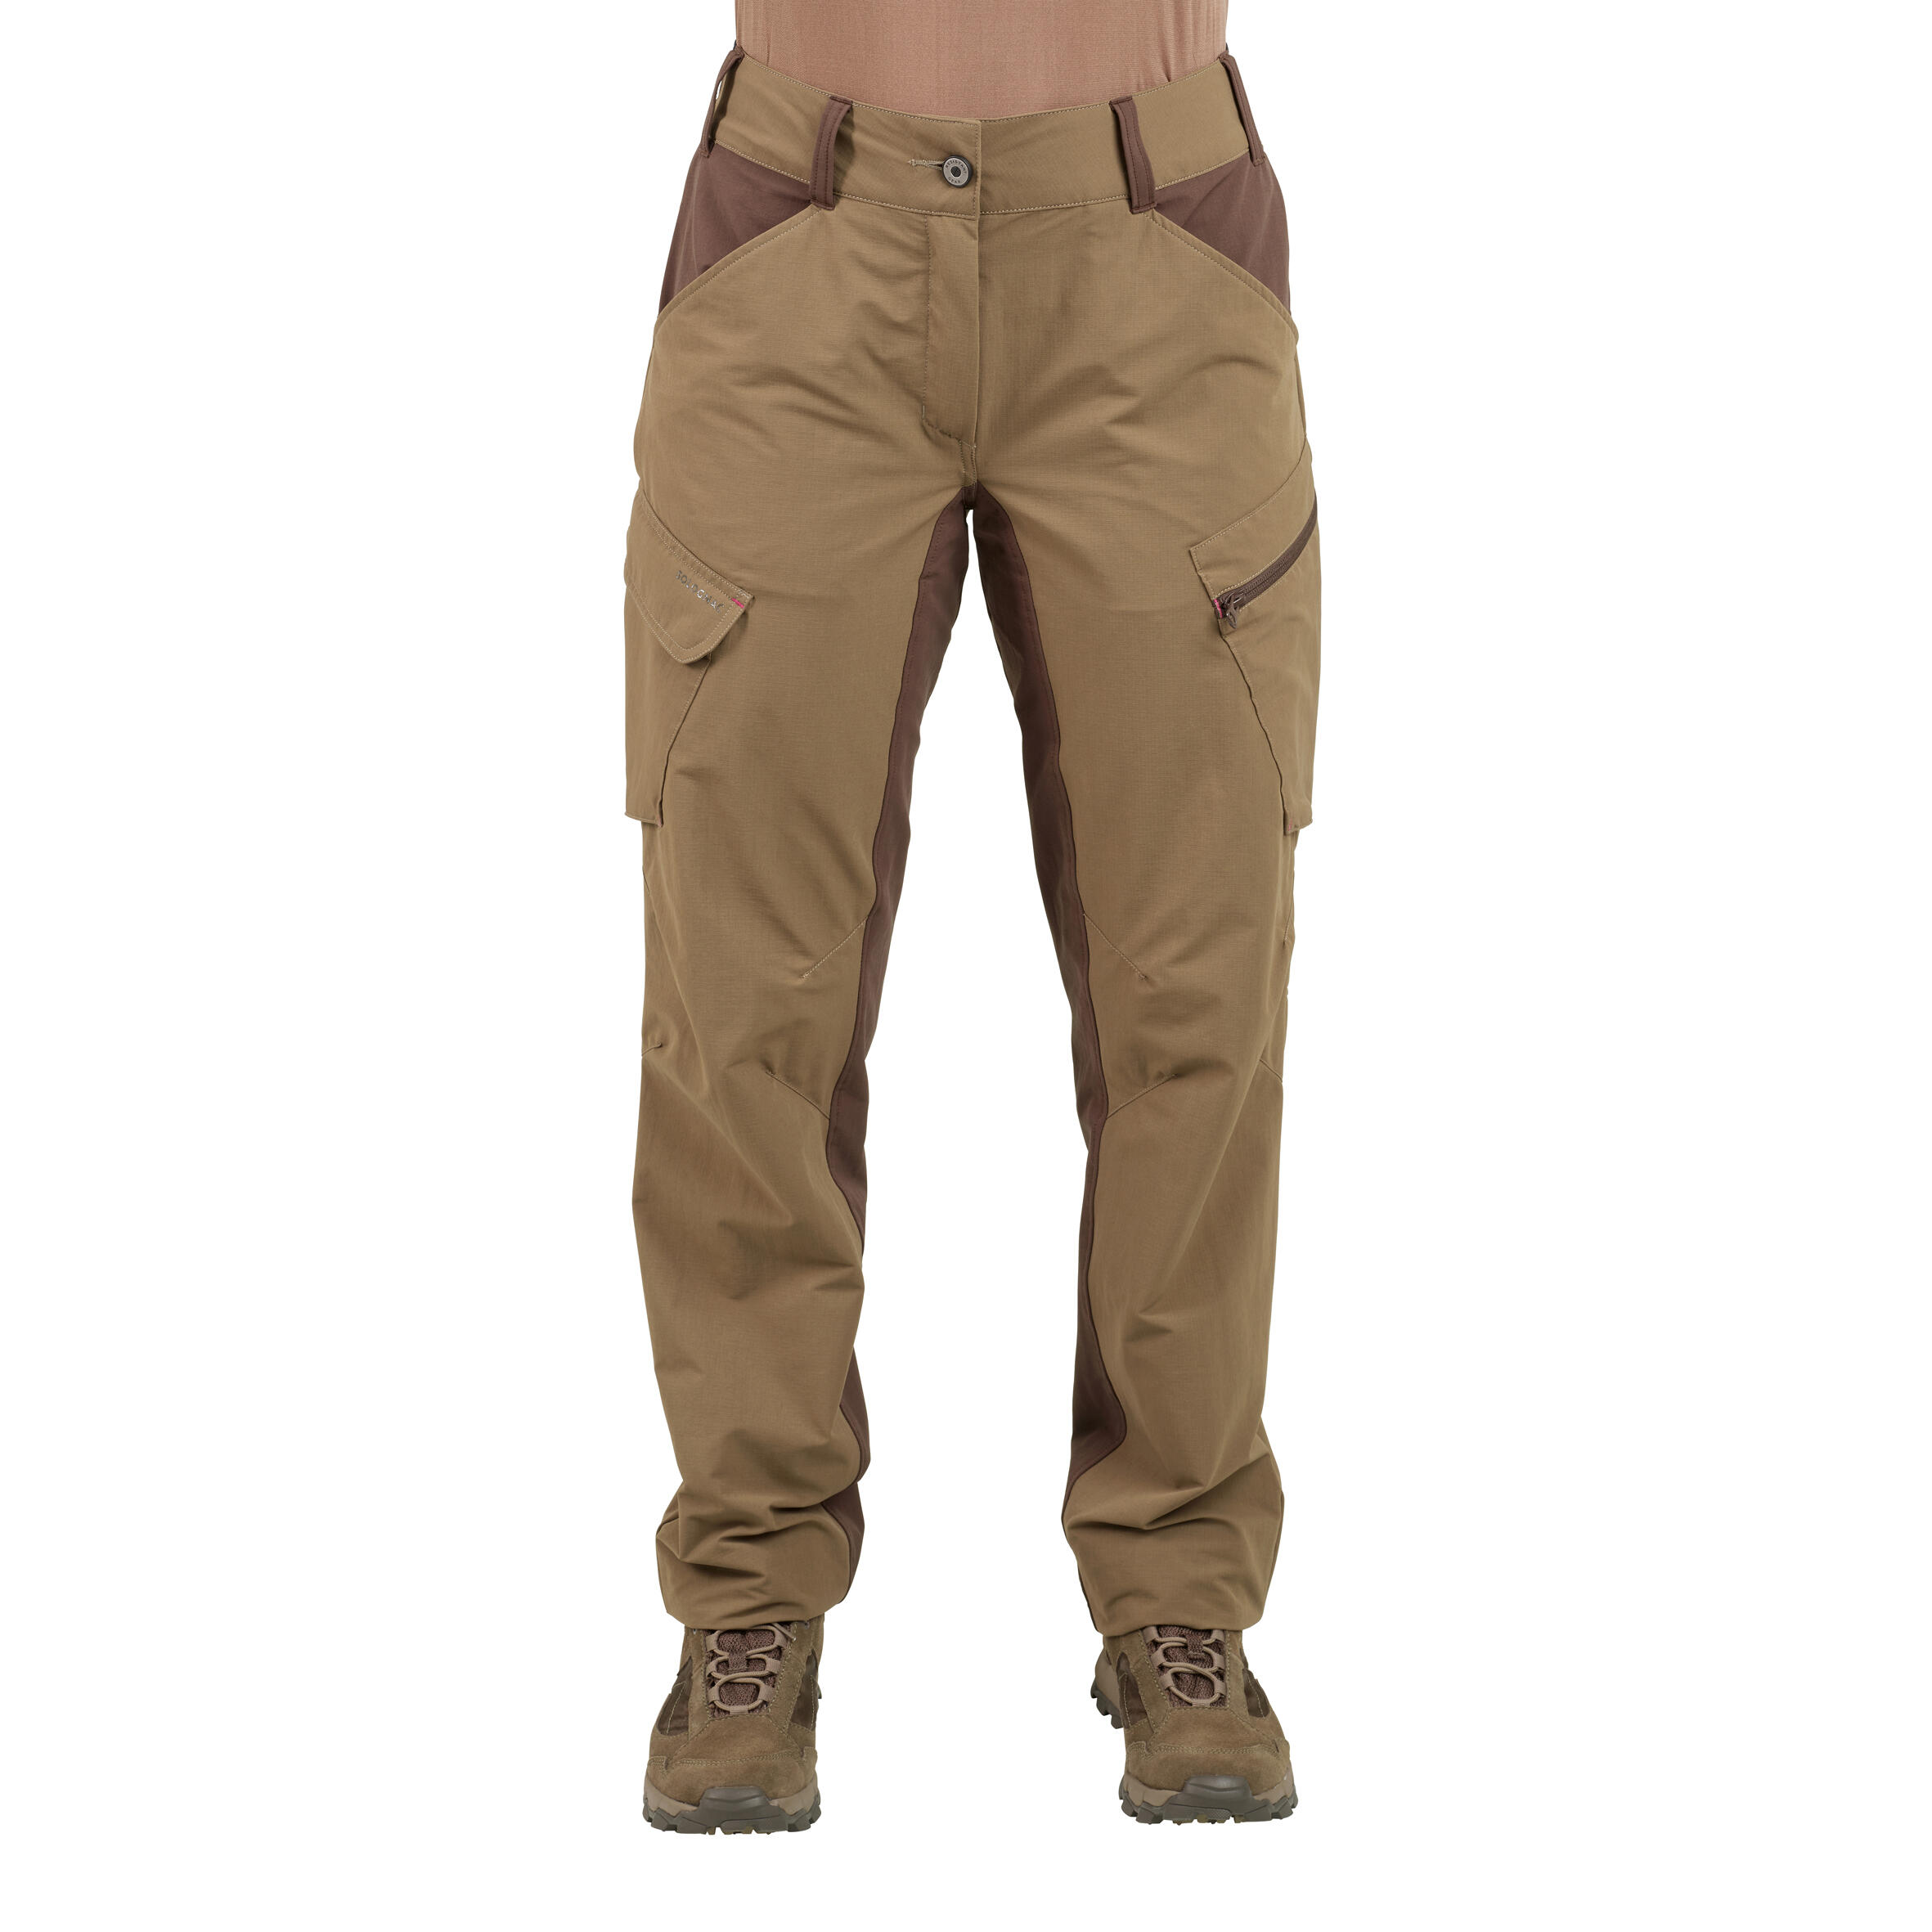 Women's Trousers 500 Lightweight Breathable Brown